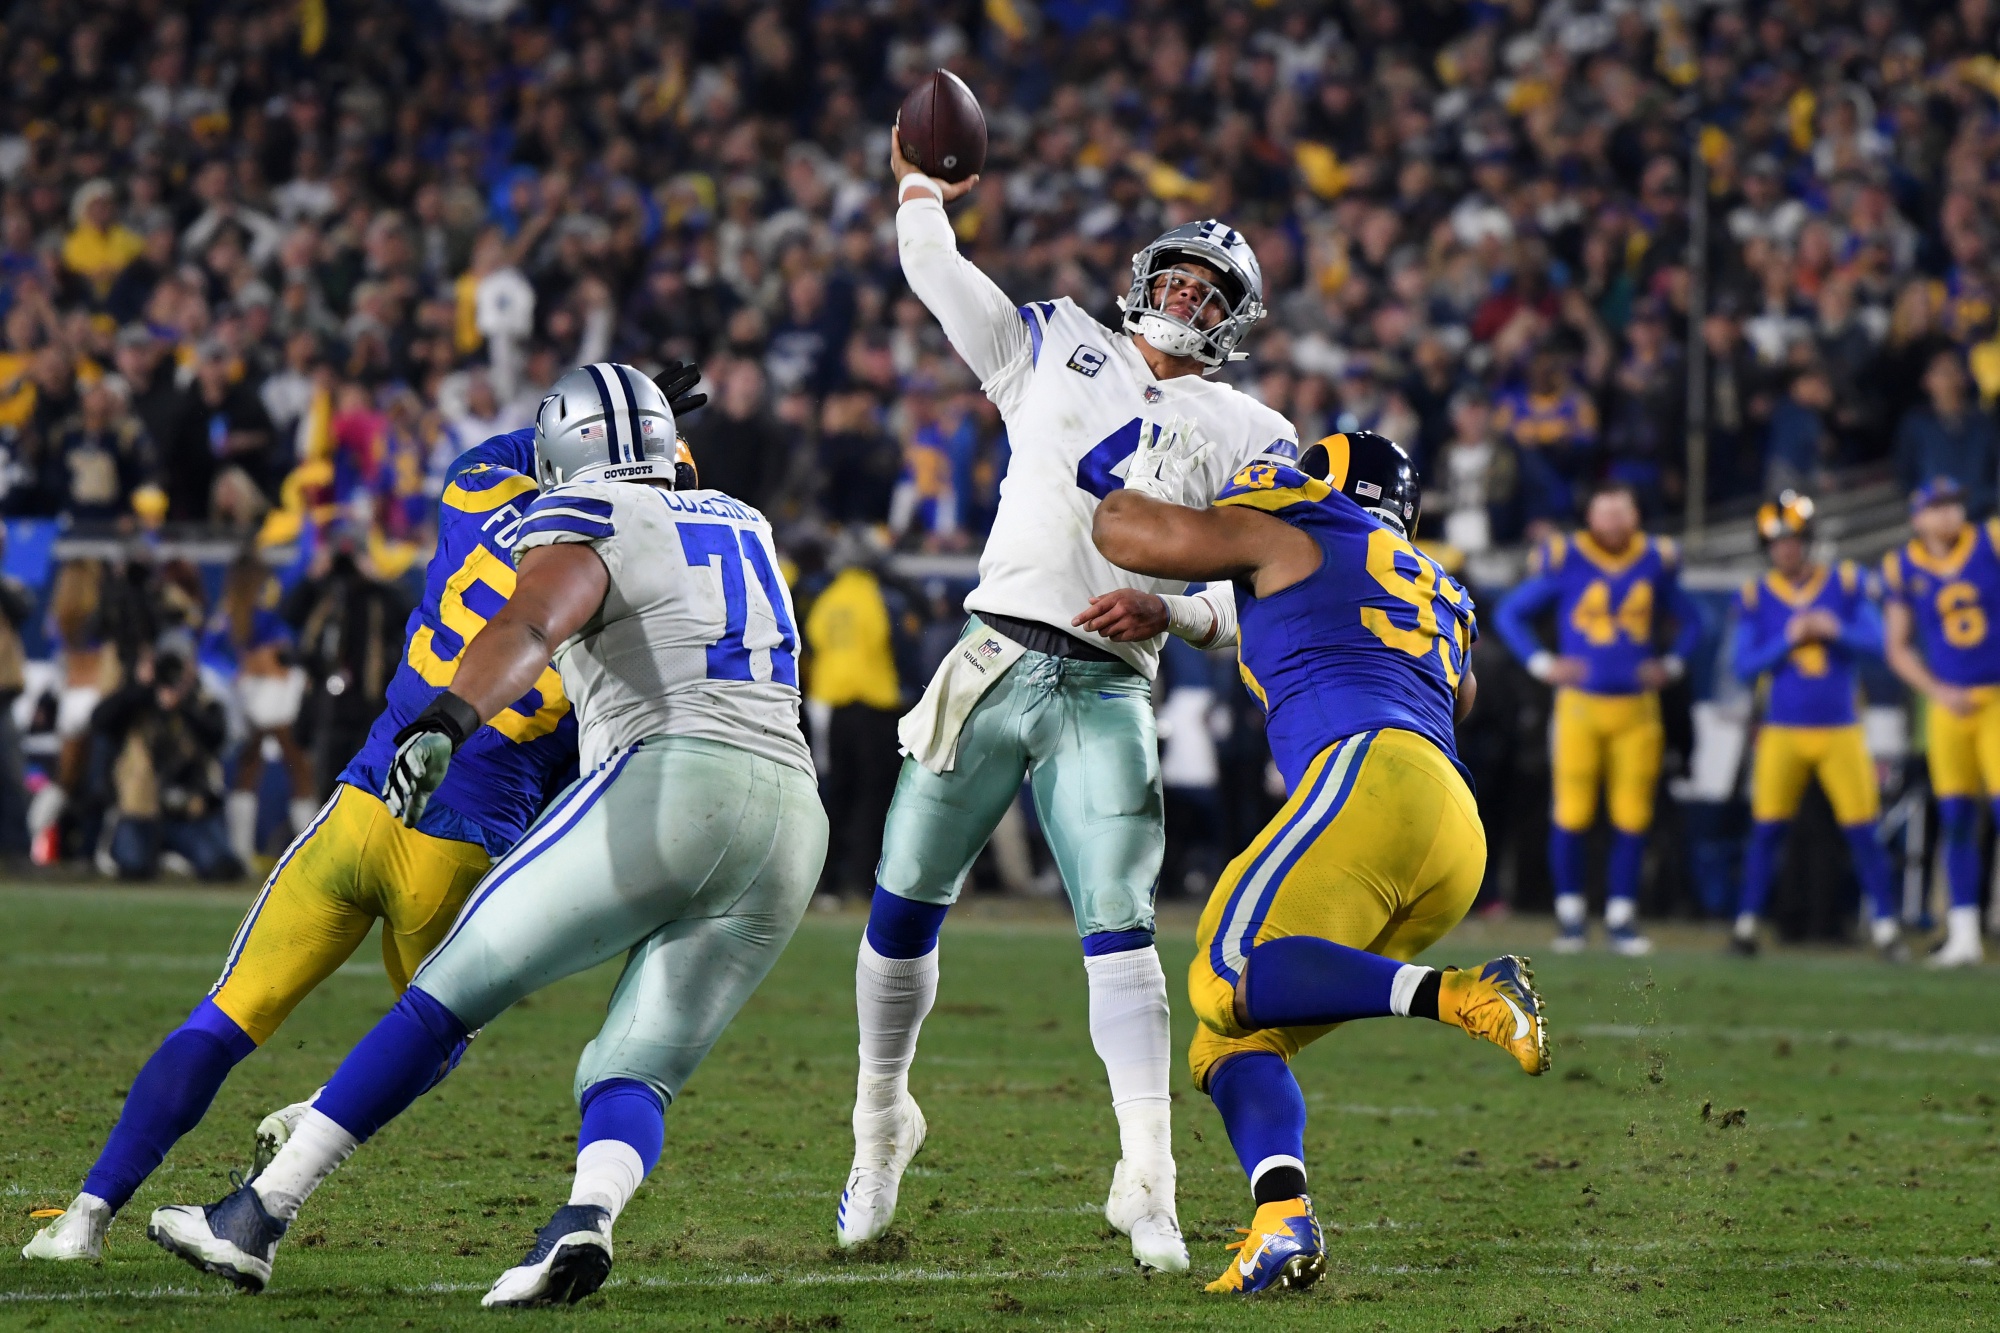 Finding a Replacement for Dak Prescott: Fantasy Football Weekly - Bloomberg